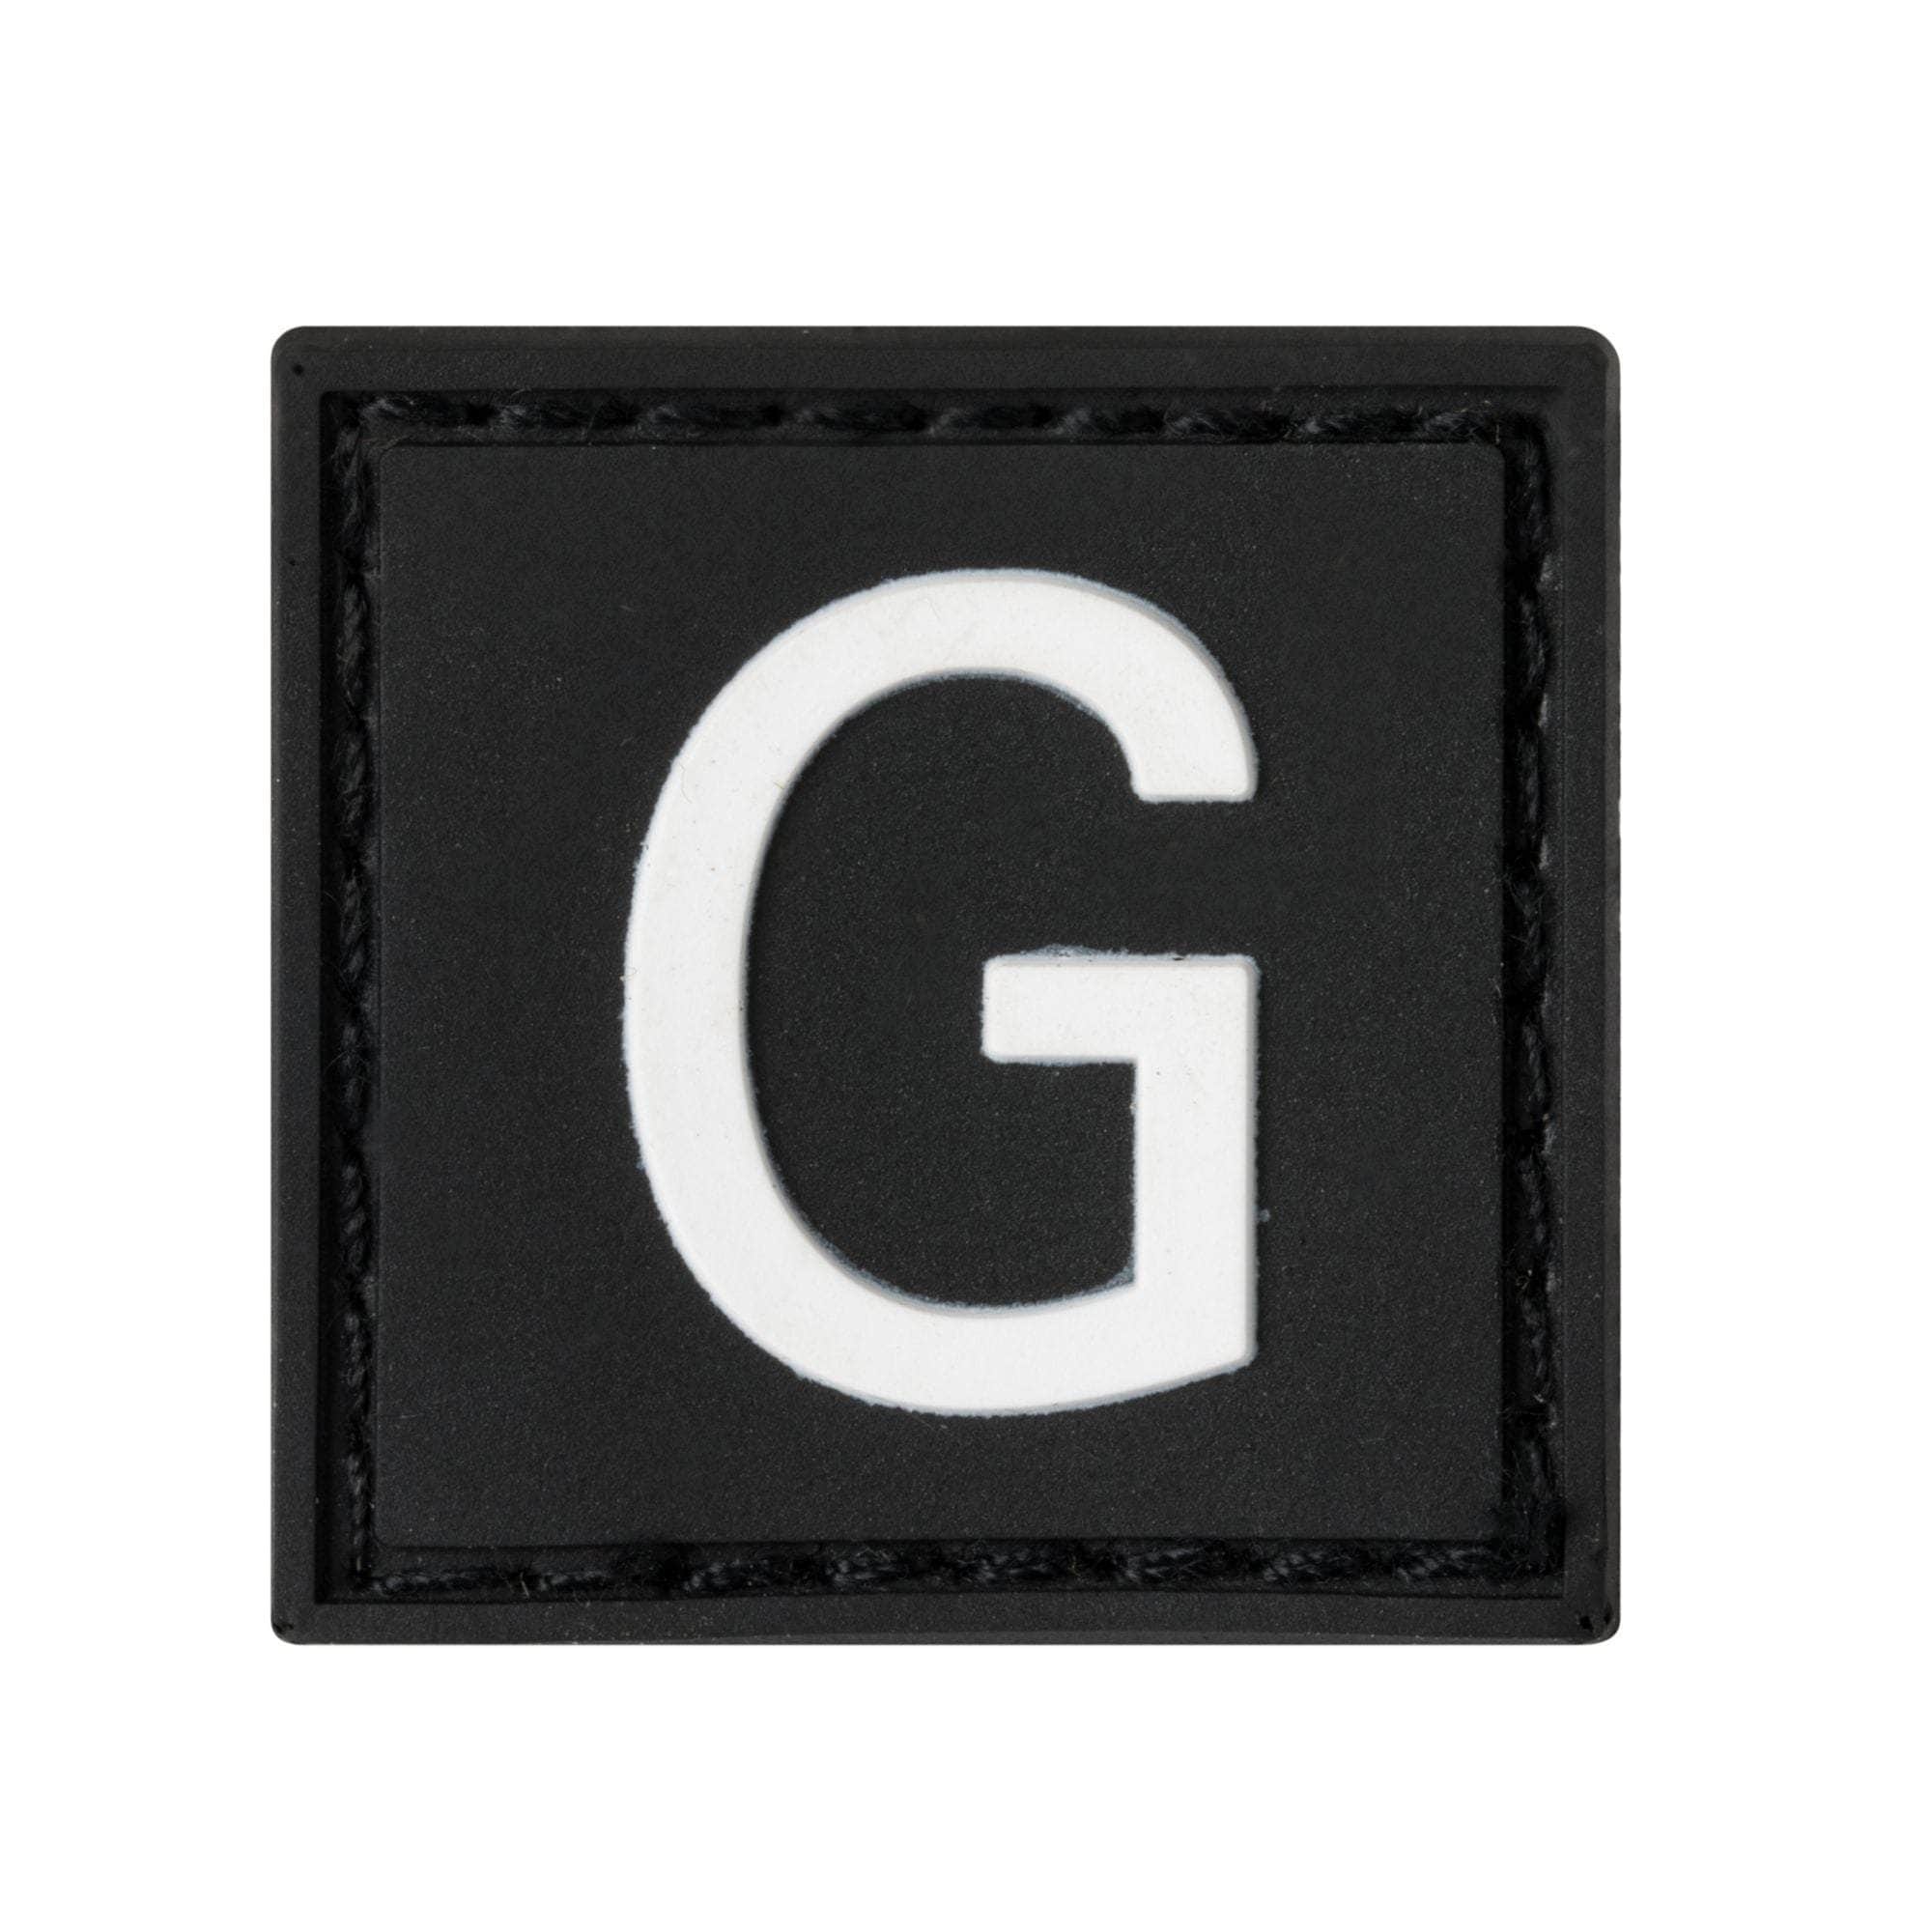 Built for Athletes Patches G Letter Rubber Patches